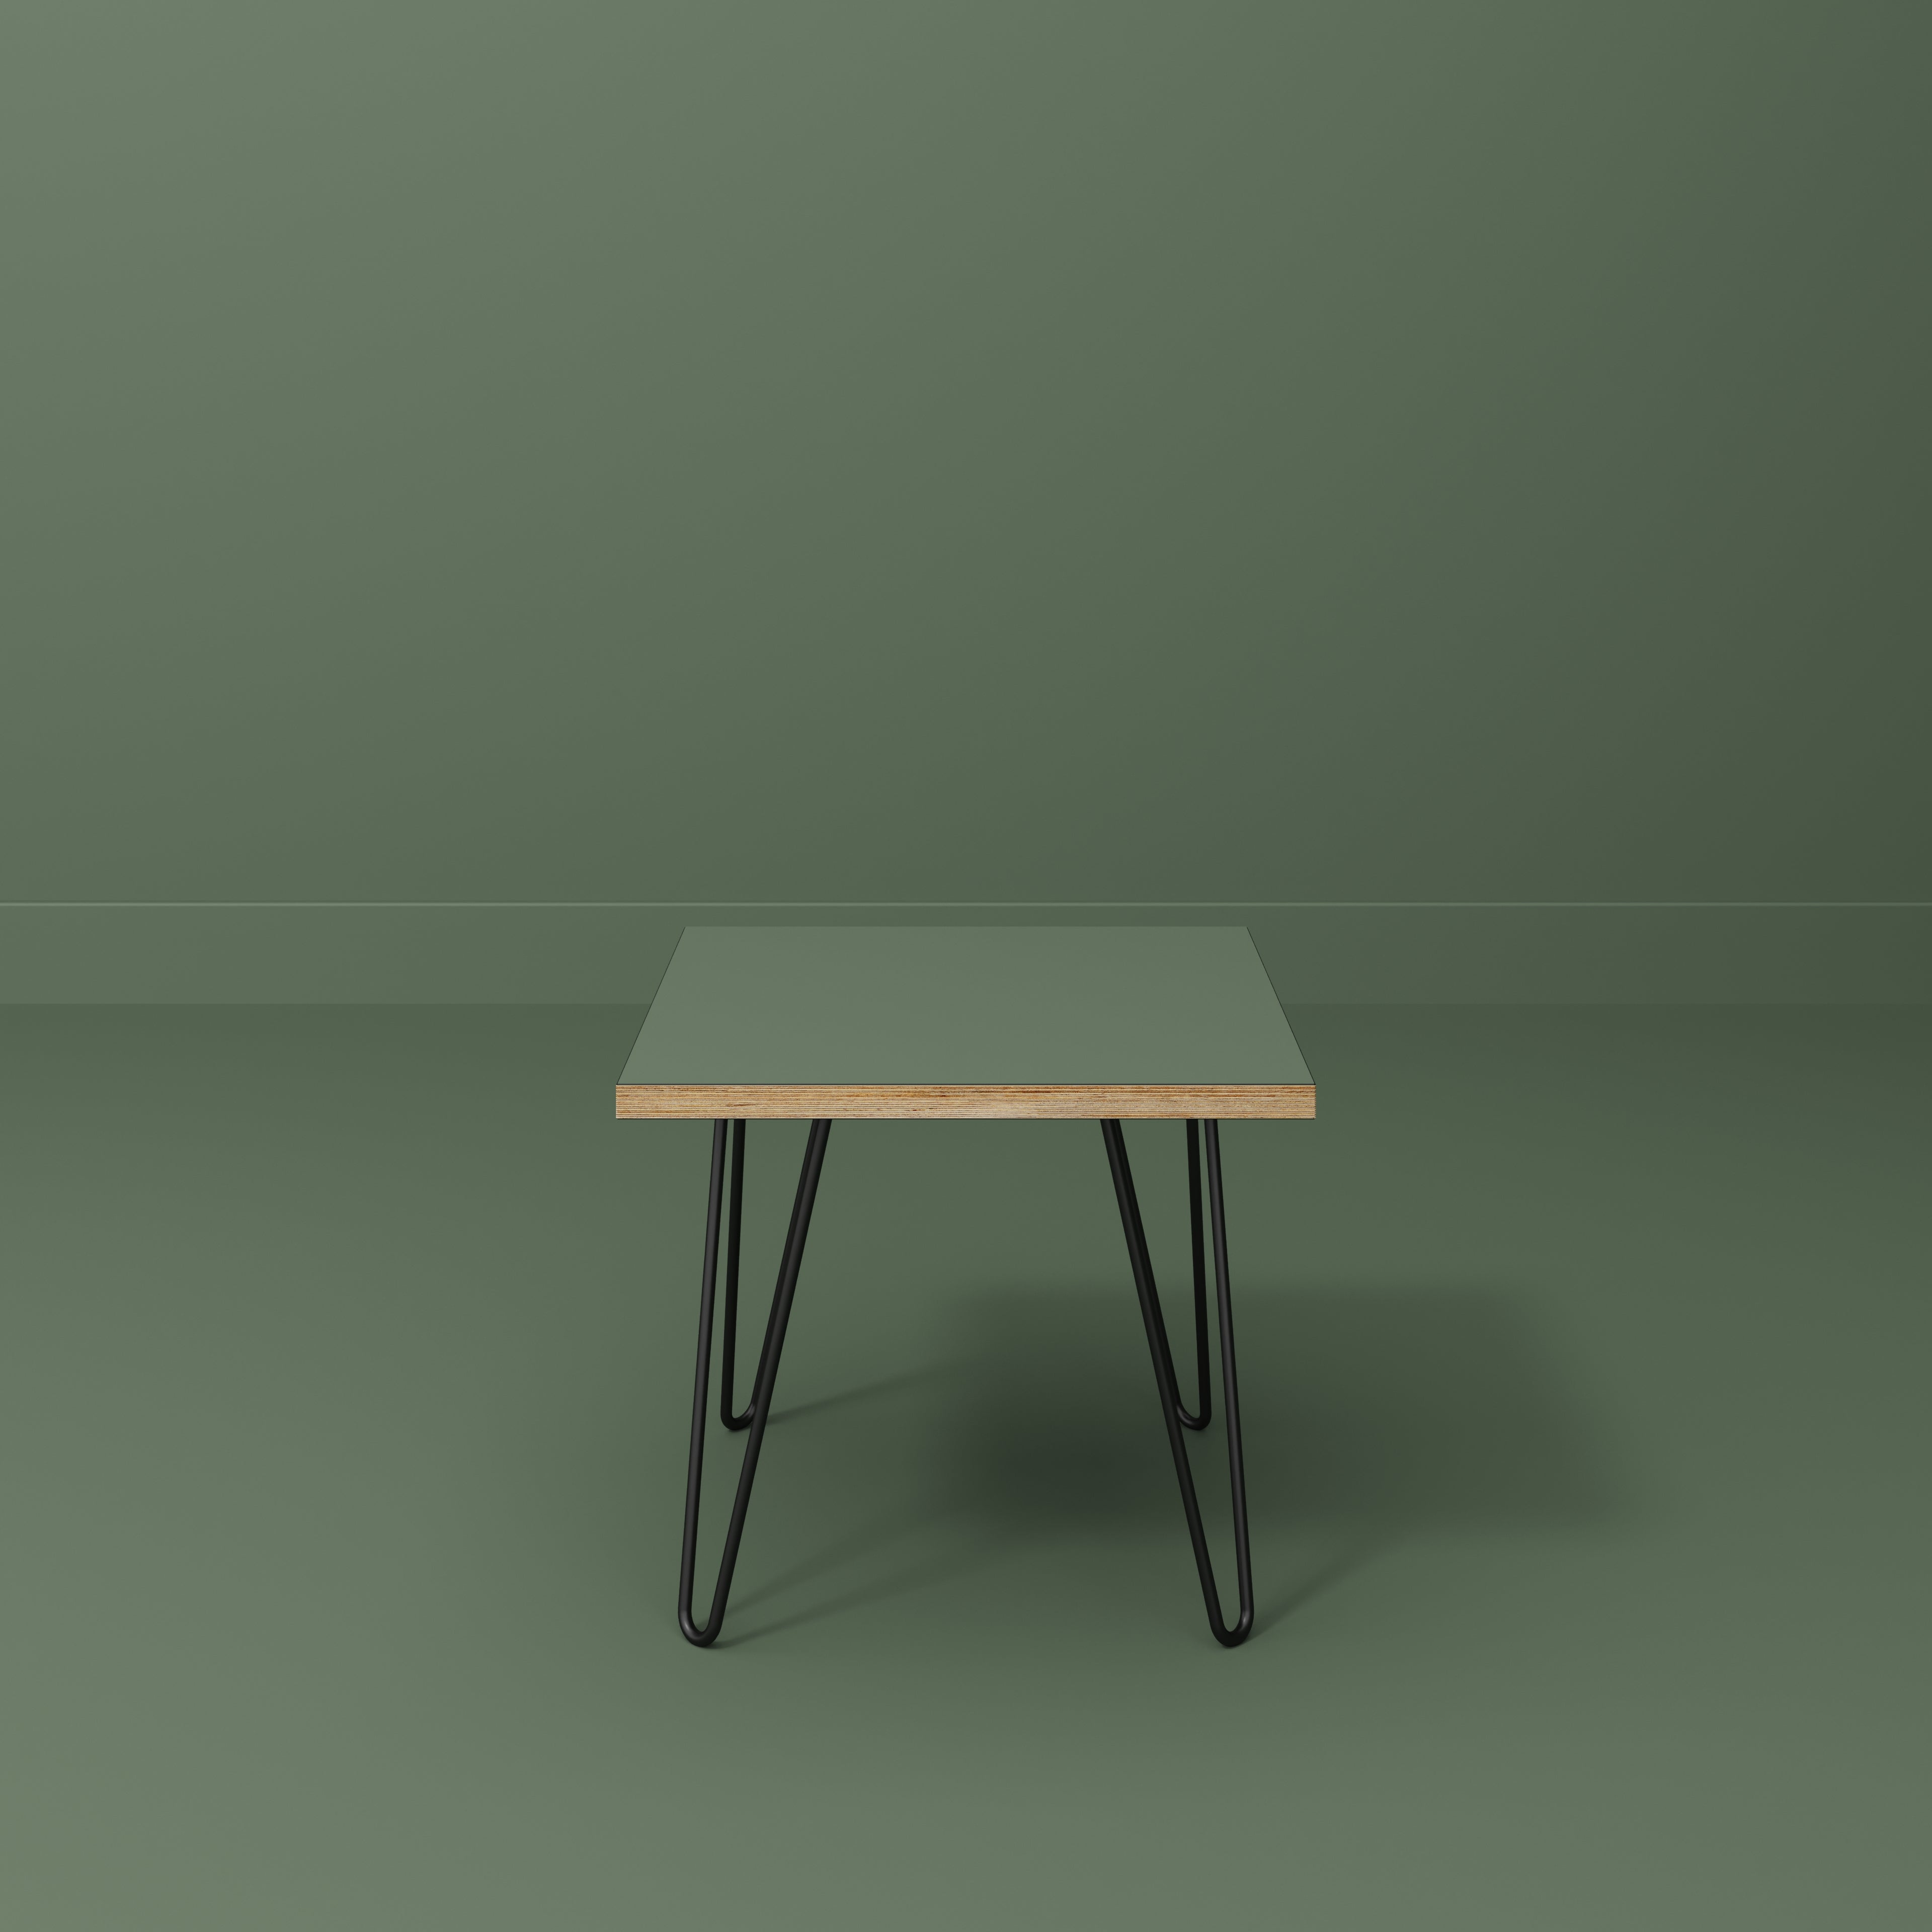 Side Table with Black Hairpin Legs - Formica Green Slate - 500(w) x 500(d) x 425(h)